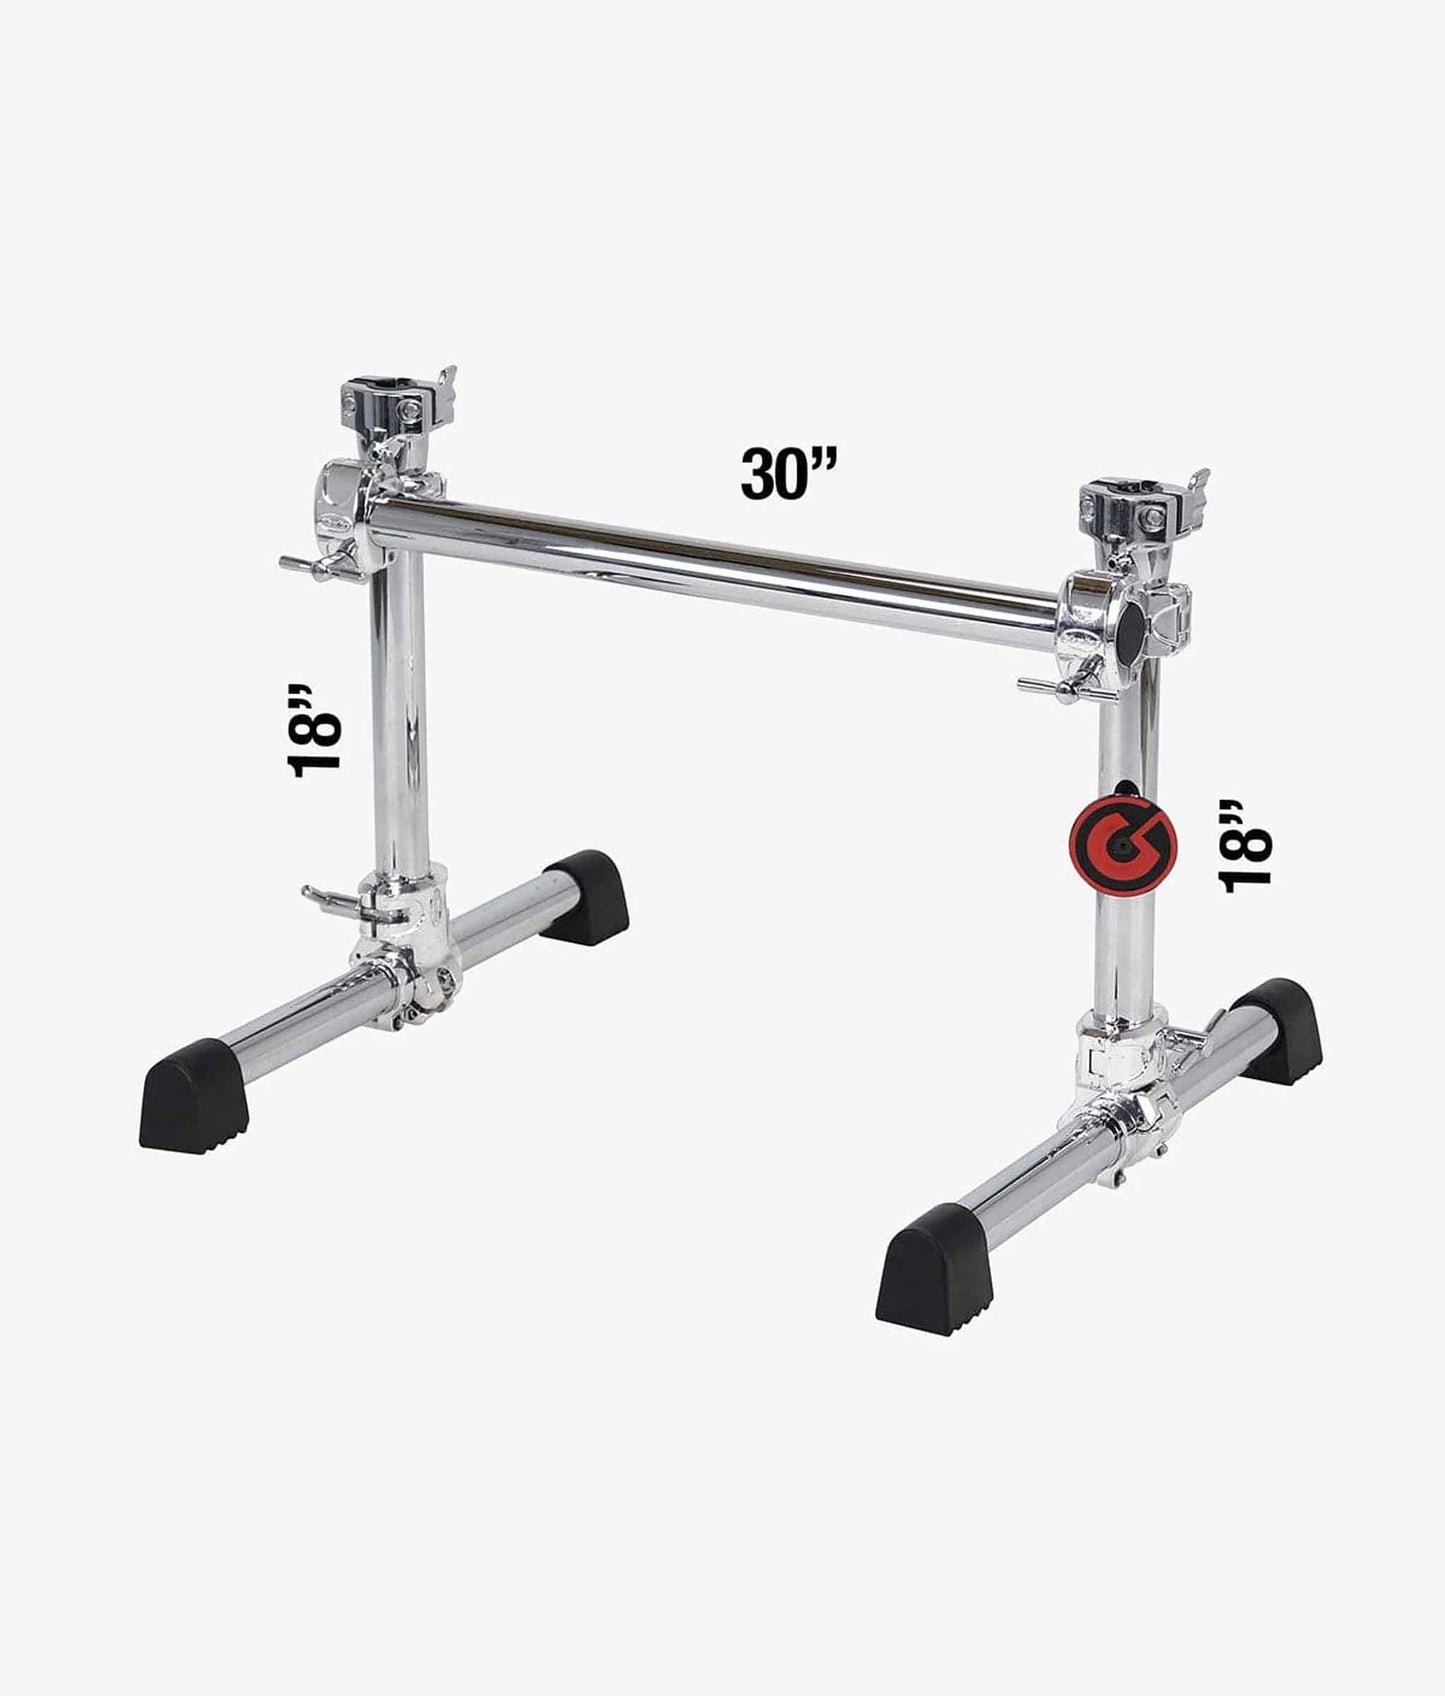 Gibraltar GSSMS Stealth Drum Rack Side Mount System with Chrome Clamps